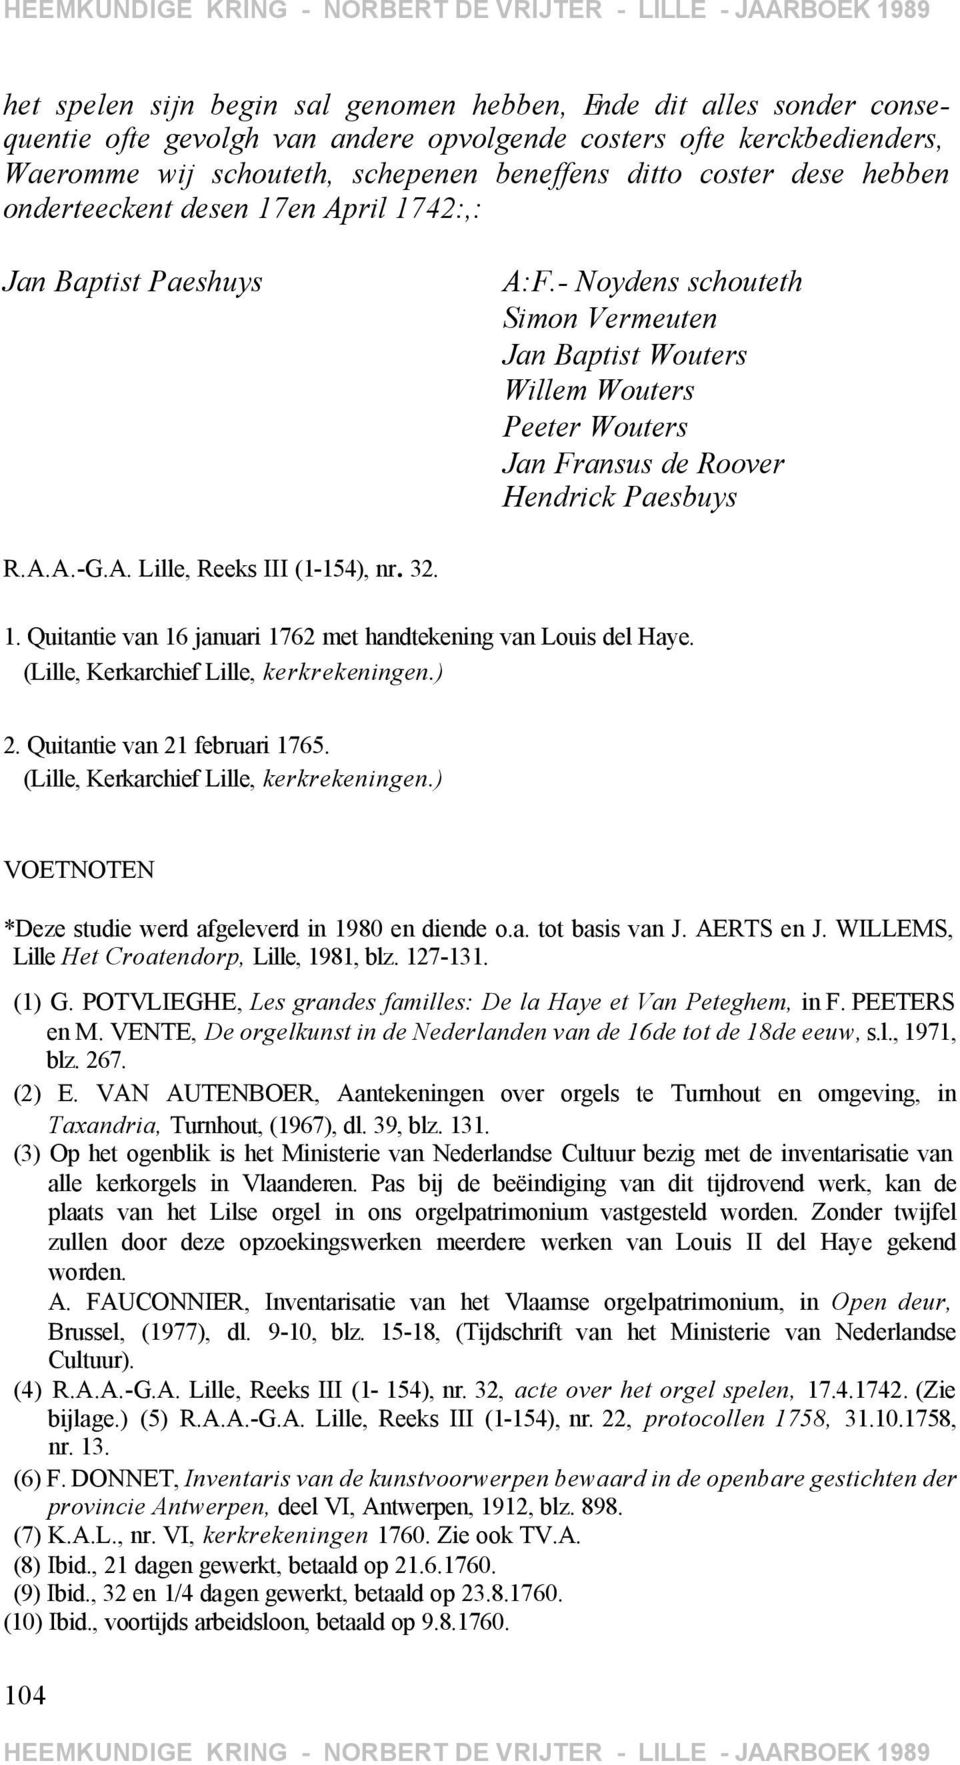 - Noydens schouteth Simon Vermeuten Jan Baptist Wouters Willem Wouters Peeter Wouters Jan Fransus de Roover Hendrick Paesbuys R.A.A.-G.A. Lille, Reeks III (1-154), nr. 32. 1.